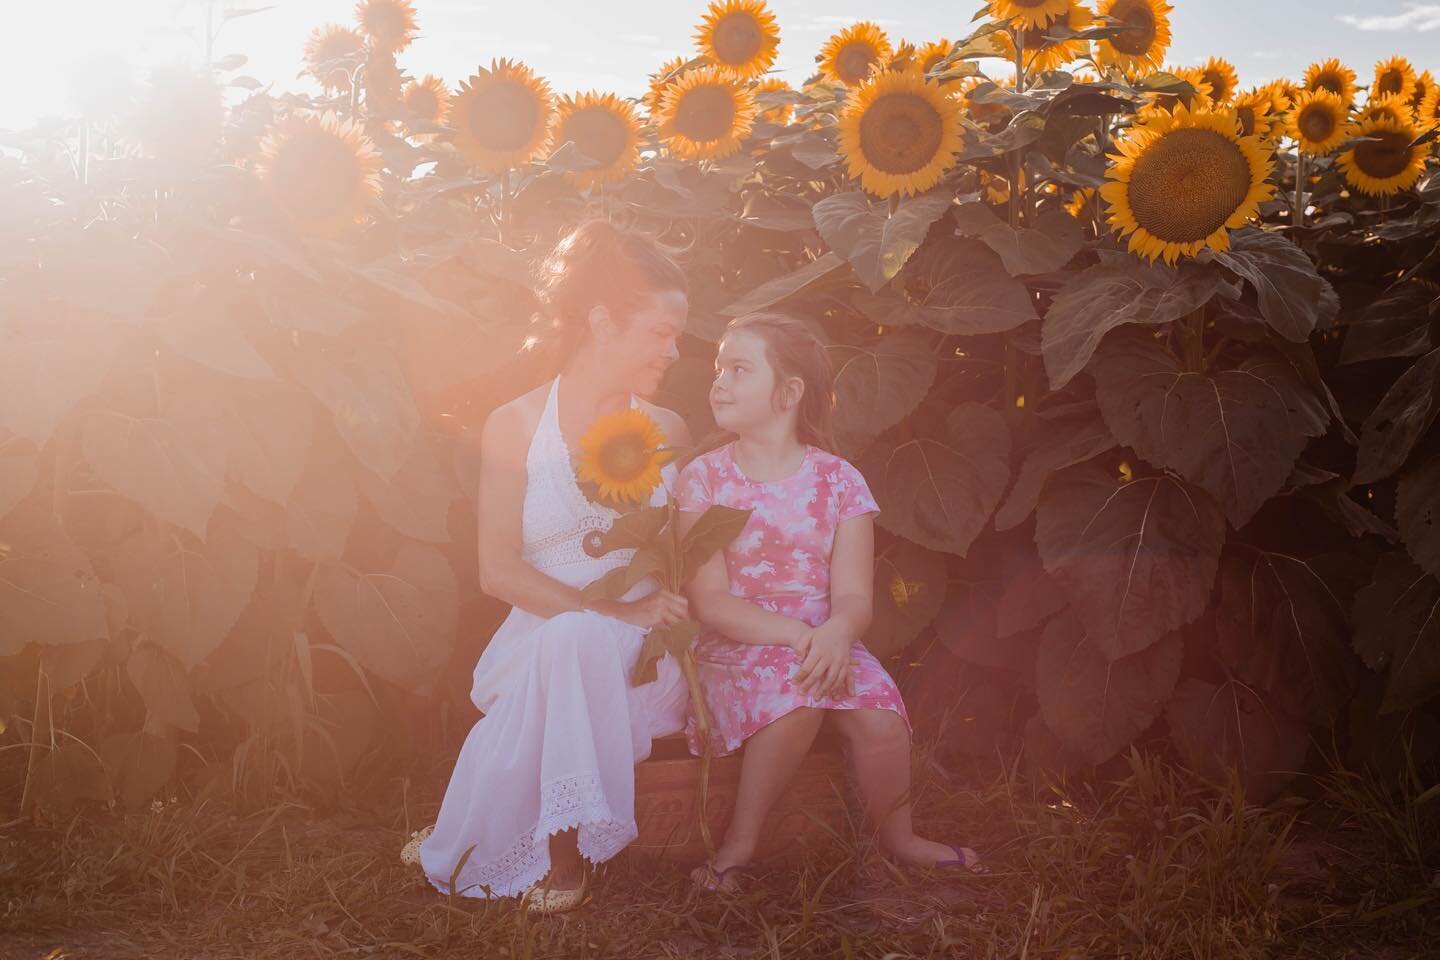 I loved the warm dreamy glow of this mother daughter session 🤩